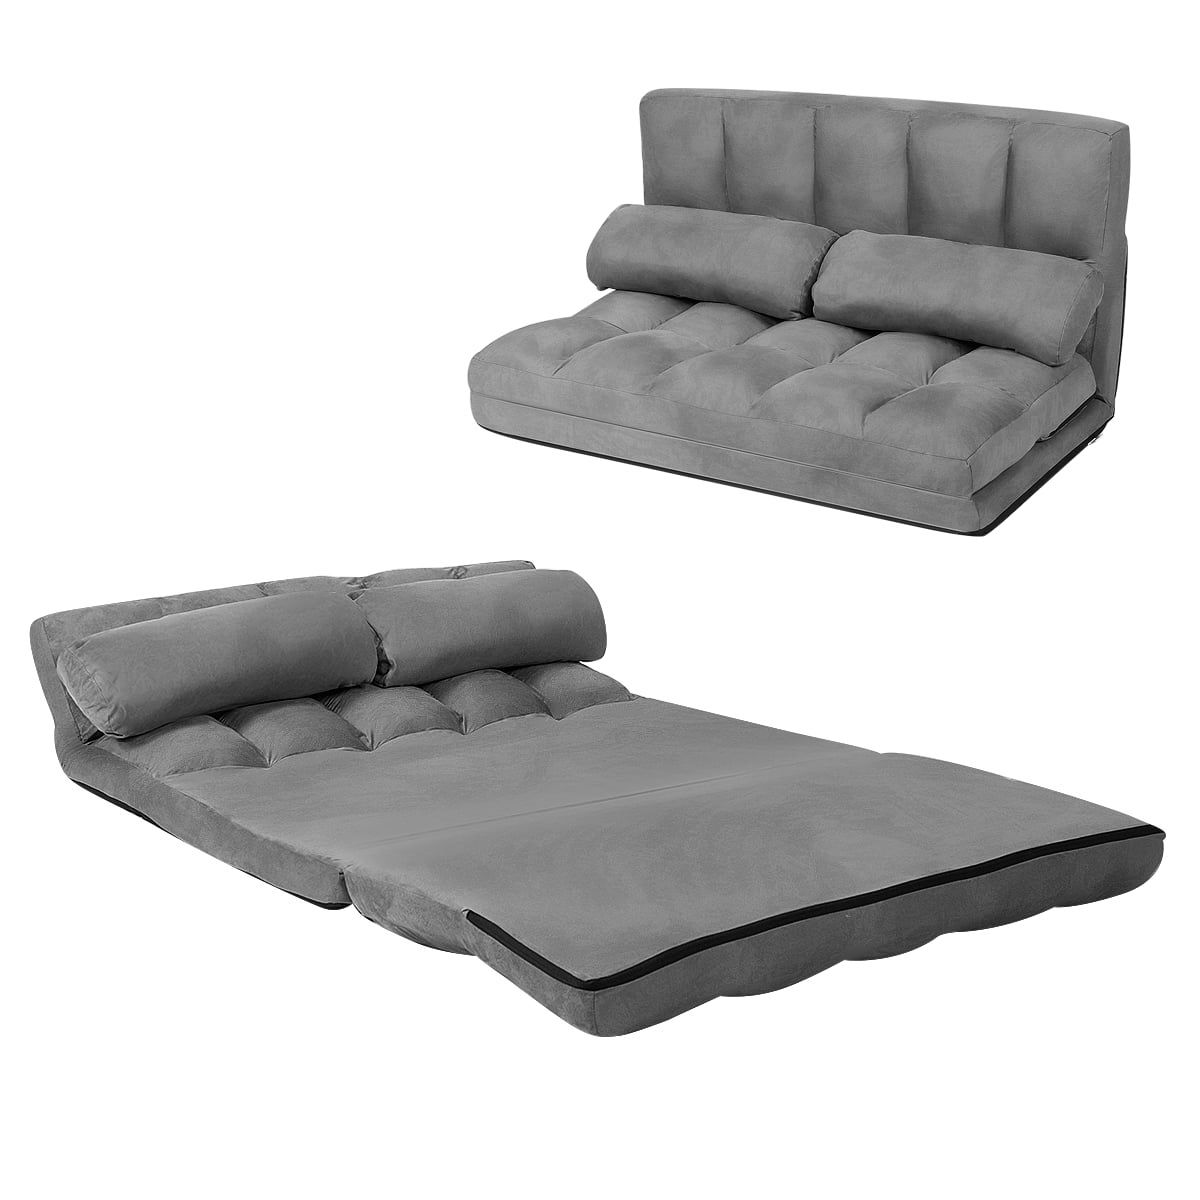 2017 2 In 1 Foldable Sofas With Regard To Topbuy Adjustable Floor Sofa Foldable Lazy Sofa Bed With 2 Pillows Grey (Photo 15 of 15)